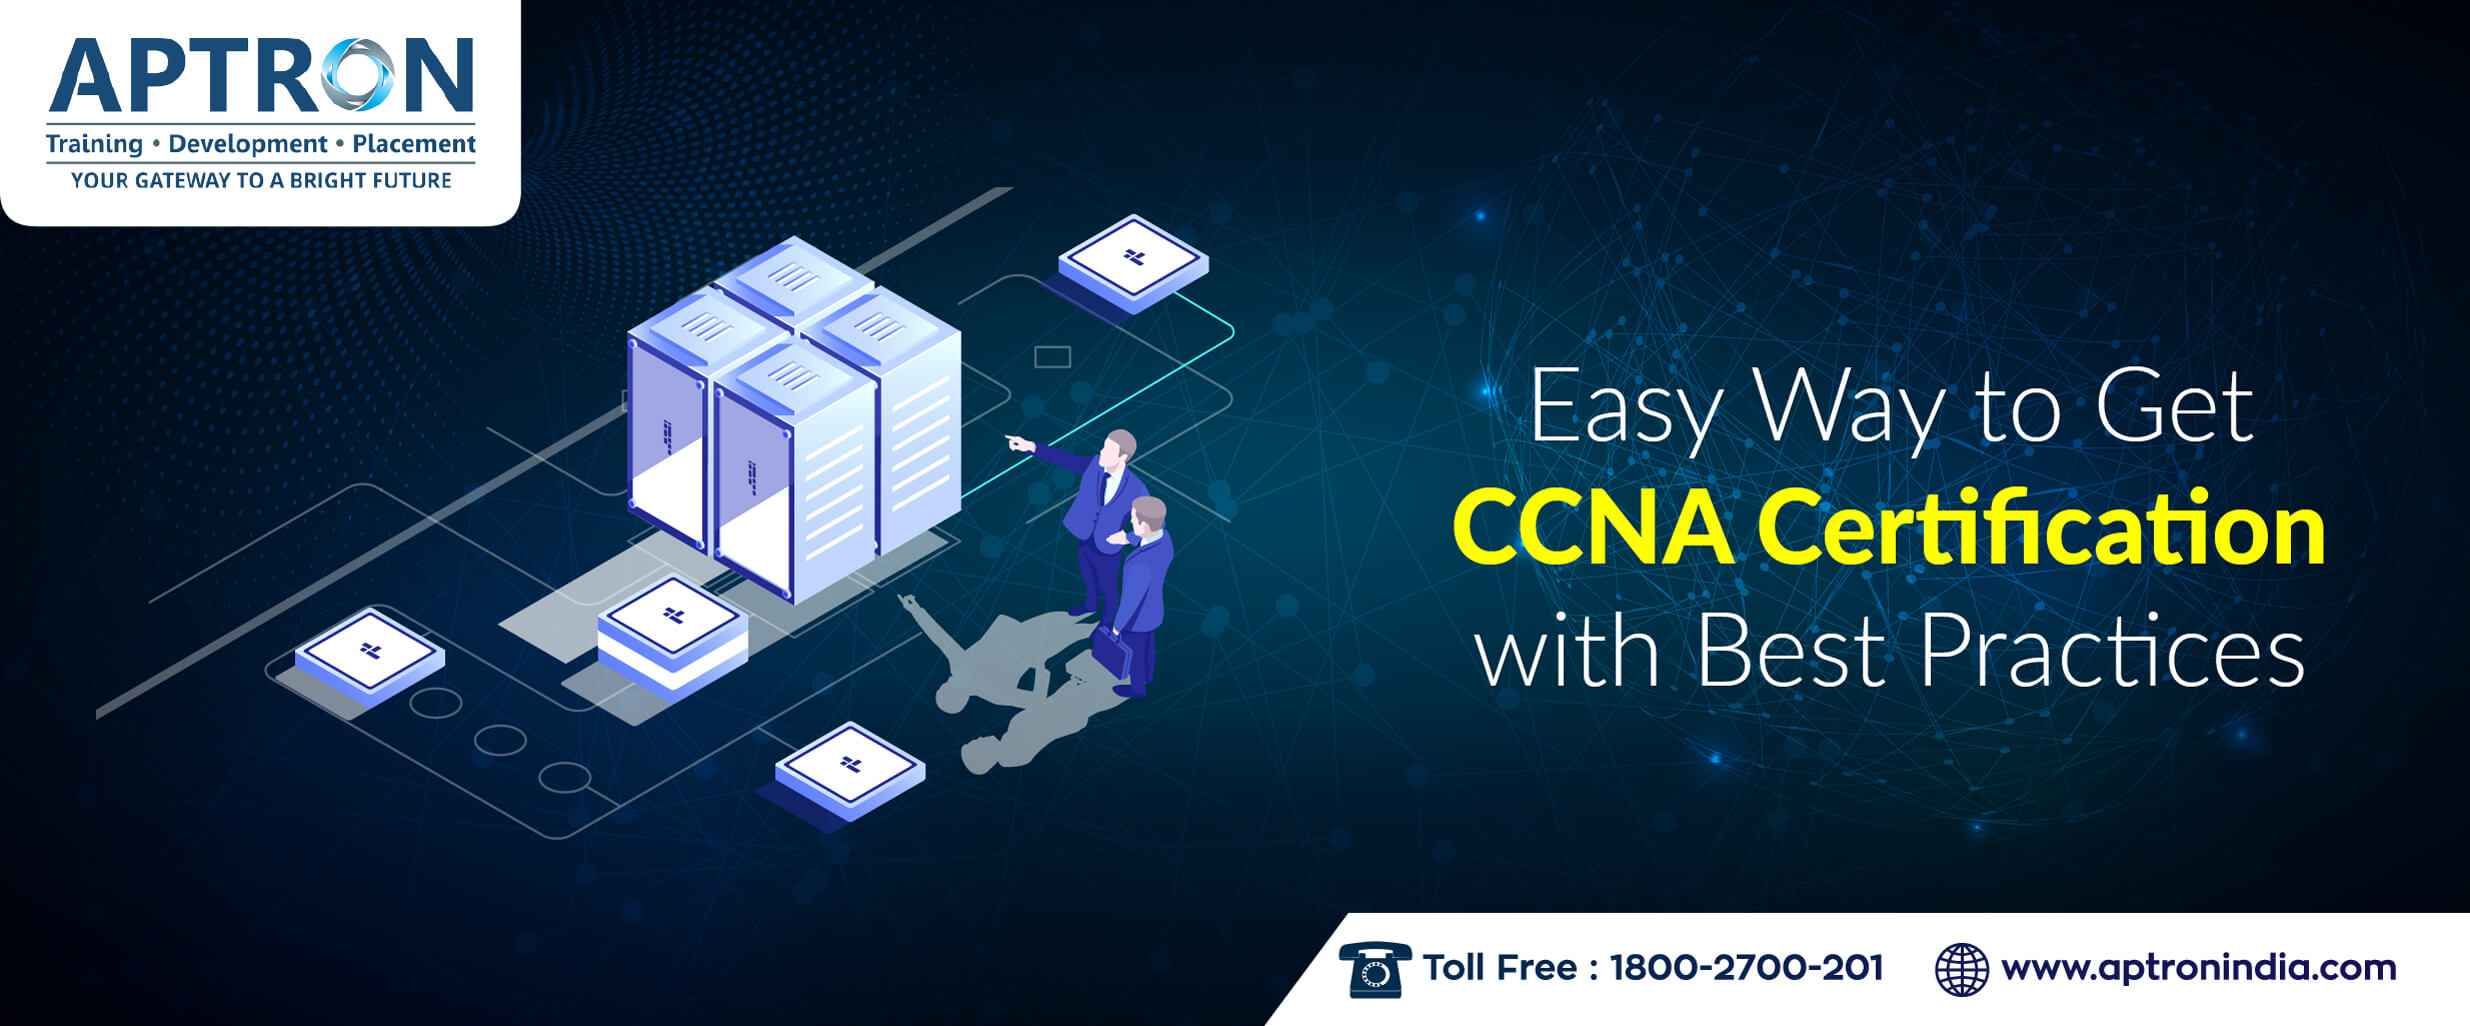 Easy Way to get CCNA Certification with Best Practices